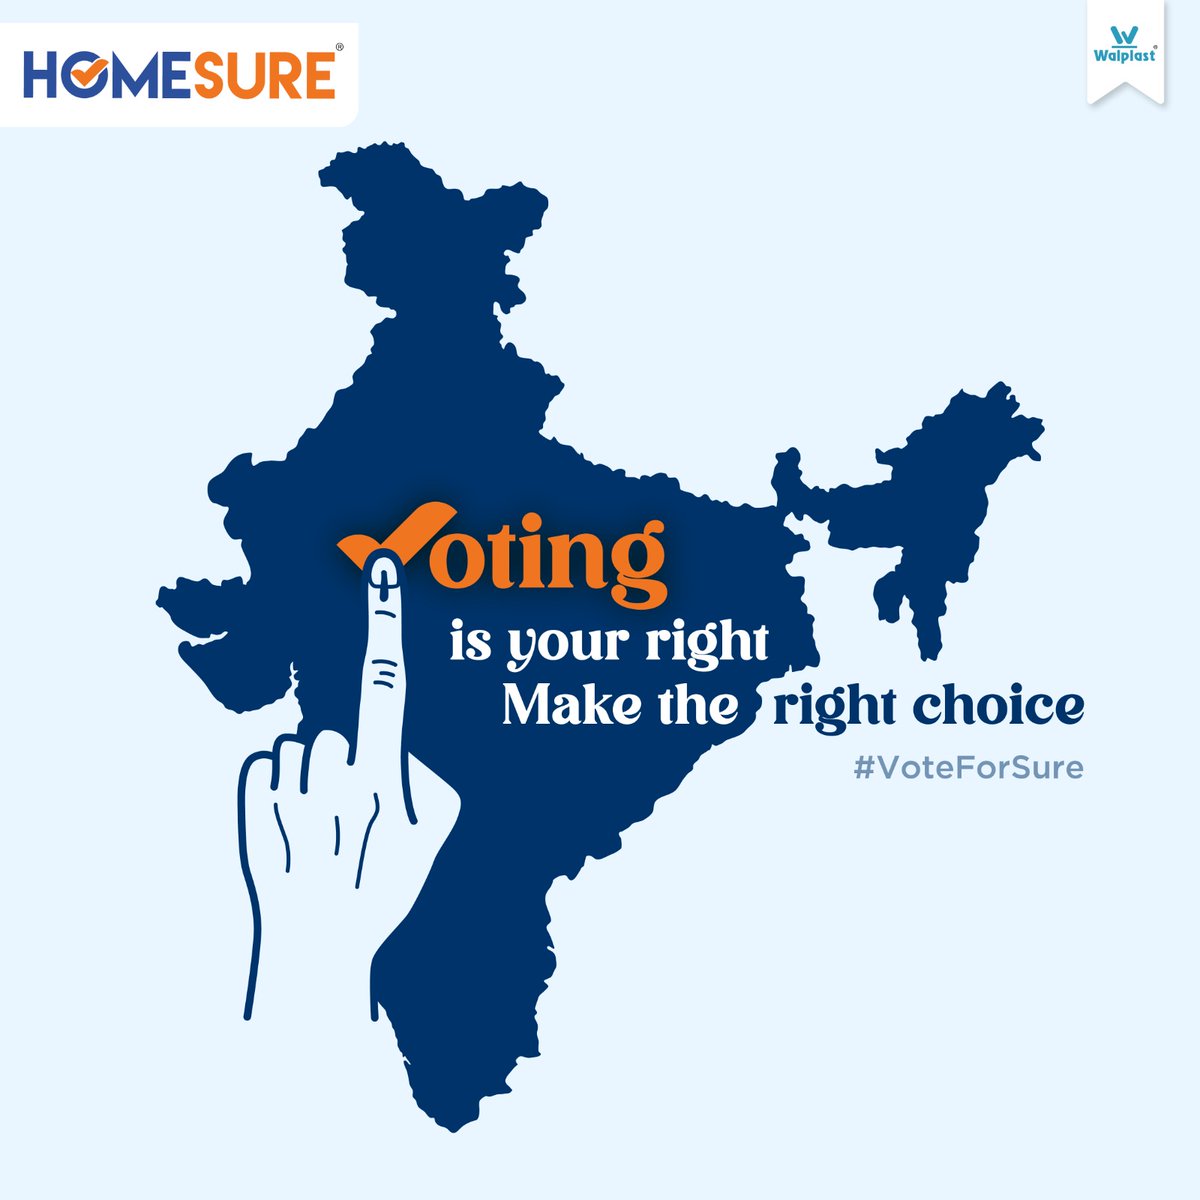 Voting is your right – Choose wisely! Both for your home and for the Nation.

#LoksabhaElections #GeneralElections #Voting #Elections2024 #Walplast #Homesure